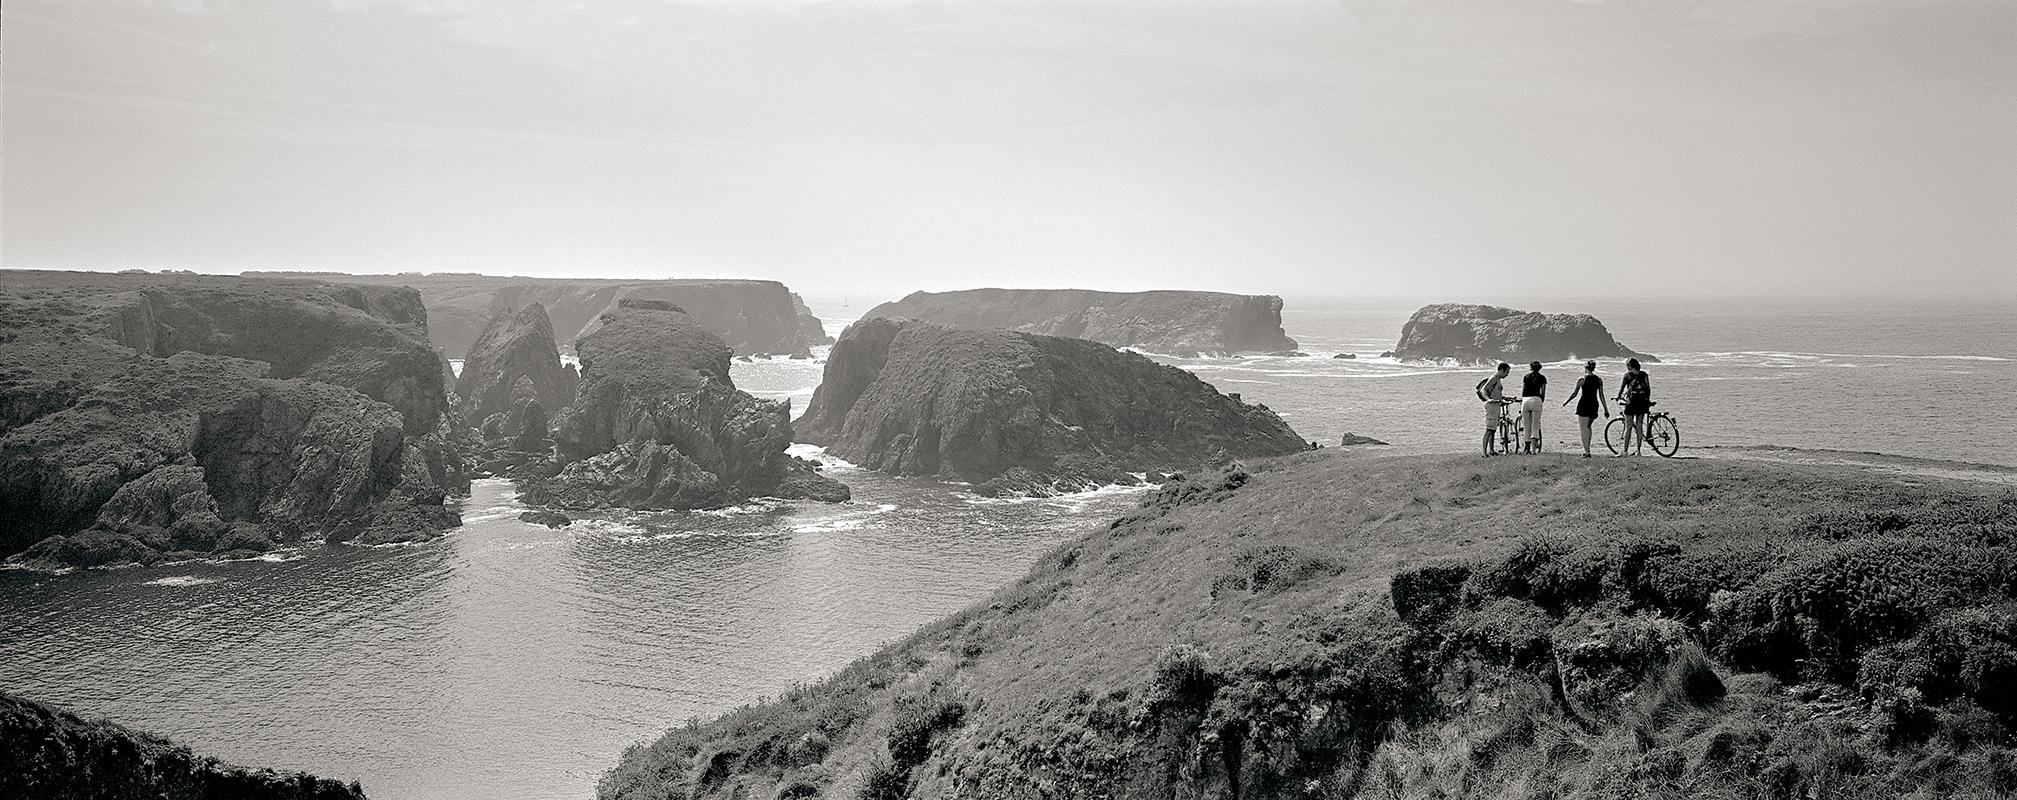 Panorama - black and white photography, Limited edition print, Landscape - Contemporary Photograph by Sam Thomas